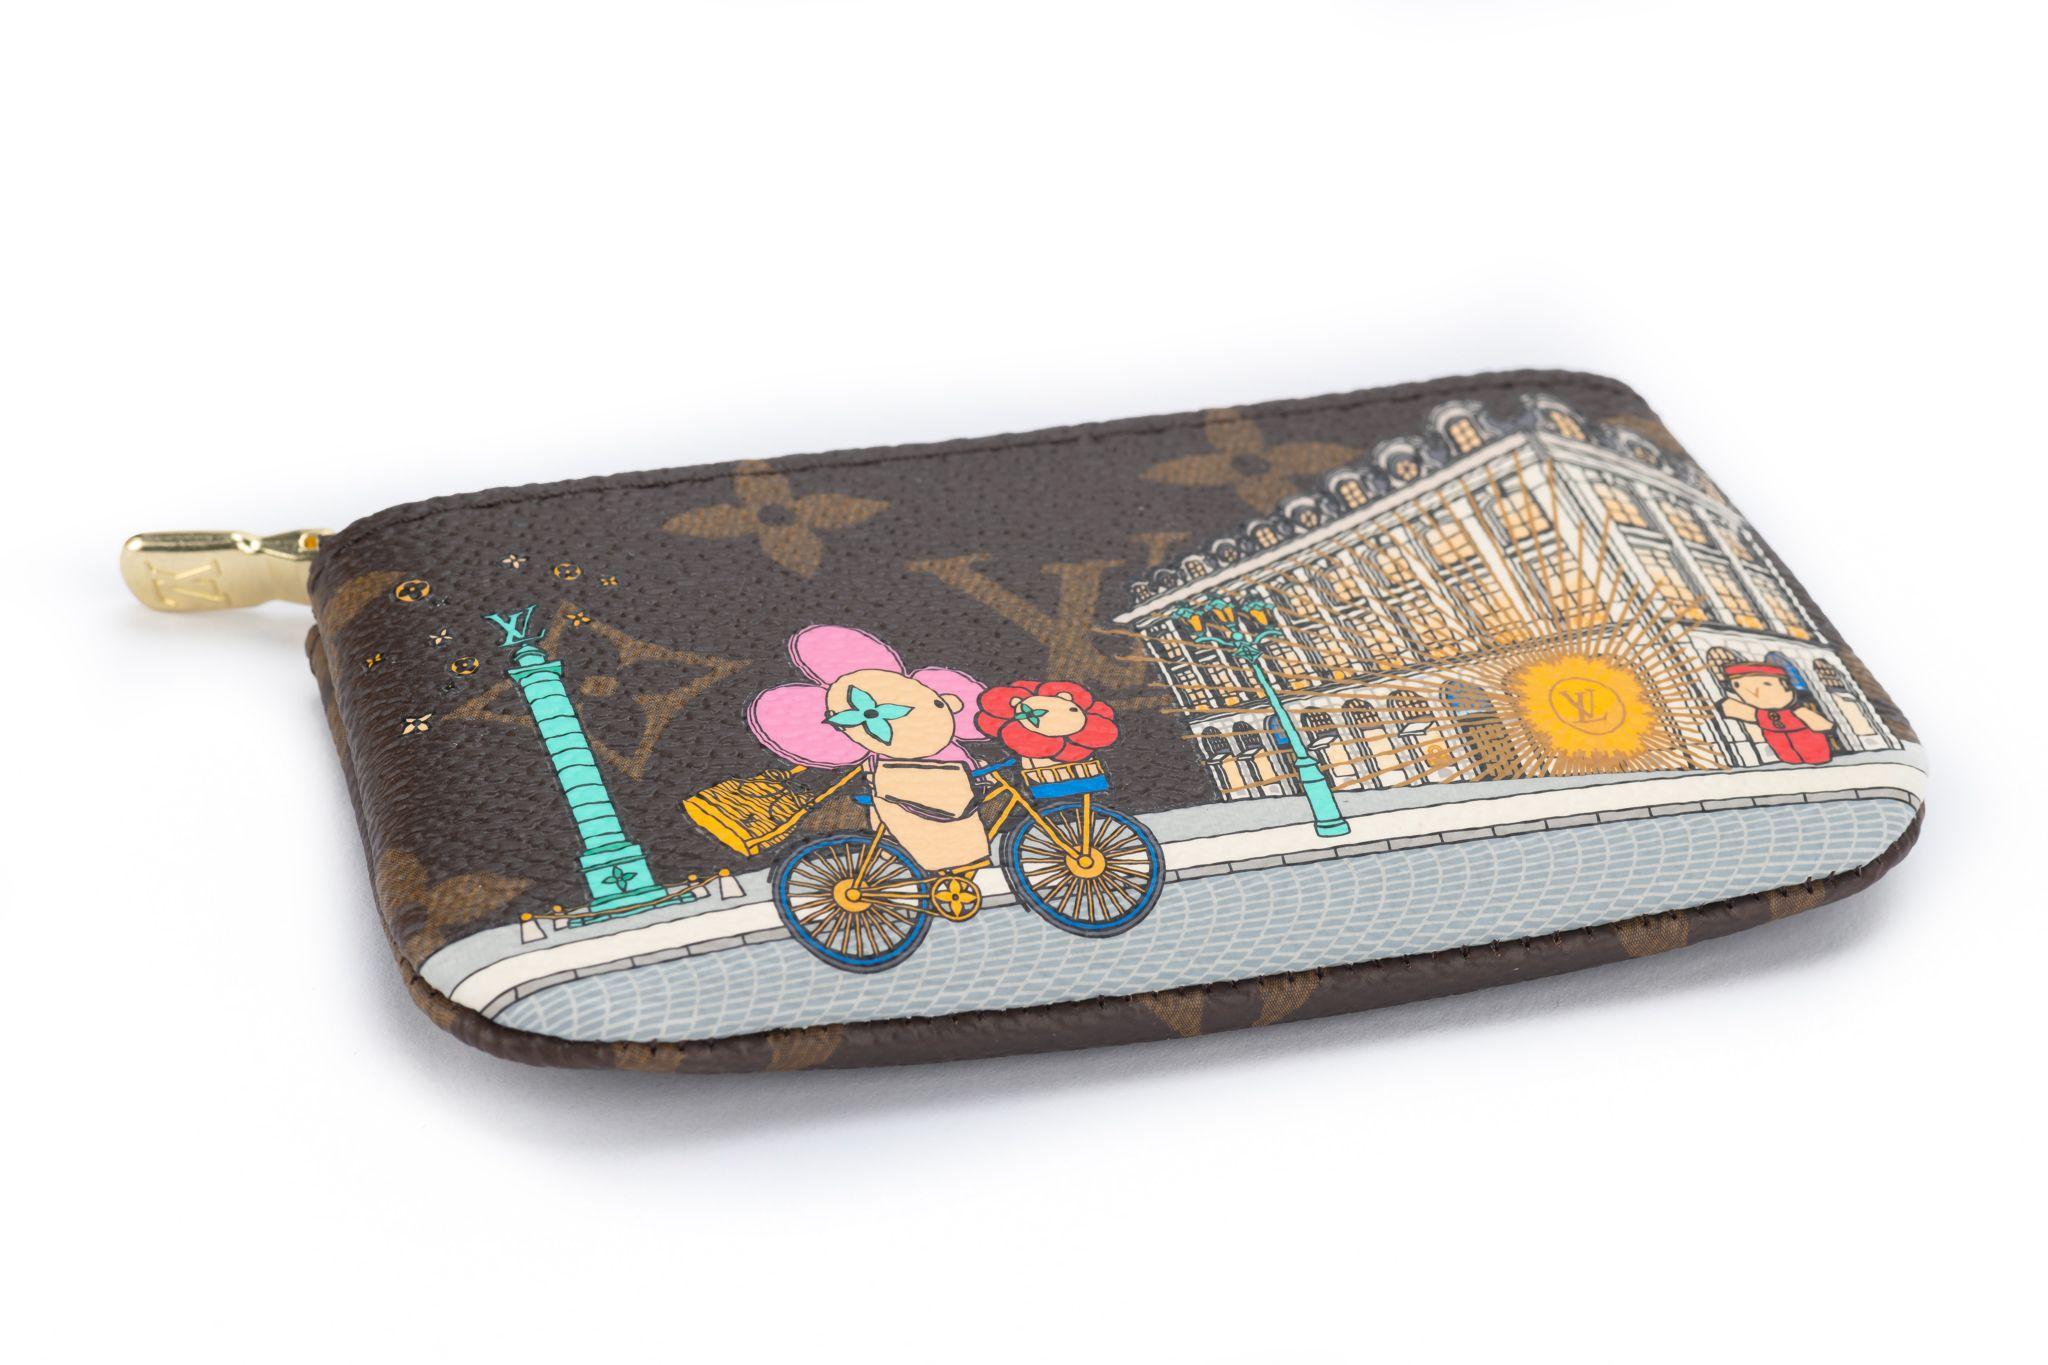 Louis Vuitton Key Card Pouch Accessoires belongs to the Vivienne Holidays 2022 collection. It's brand new and comes with the original dustcover and box.